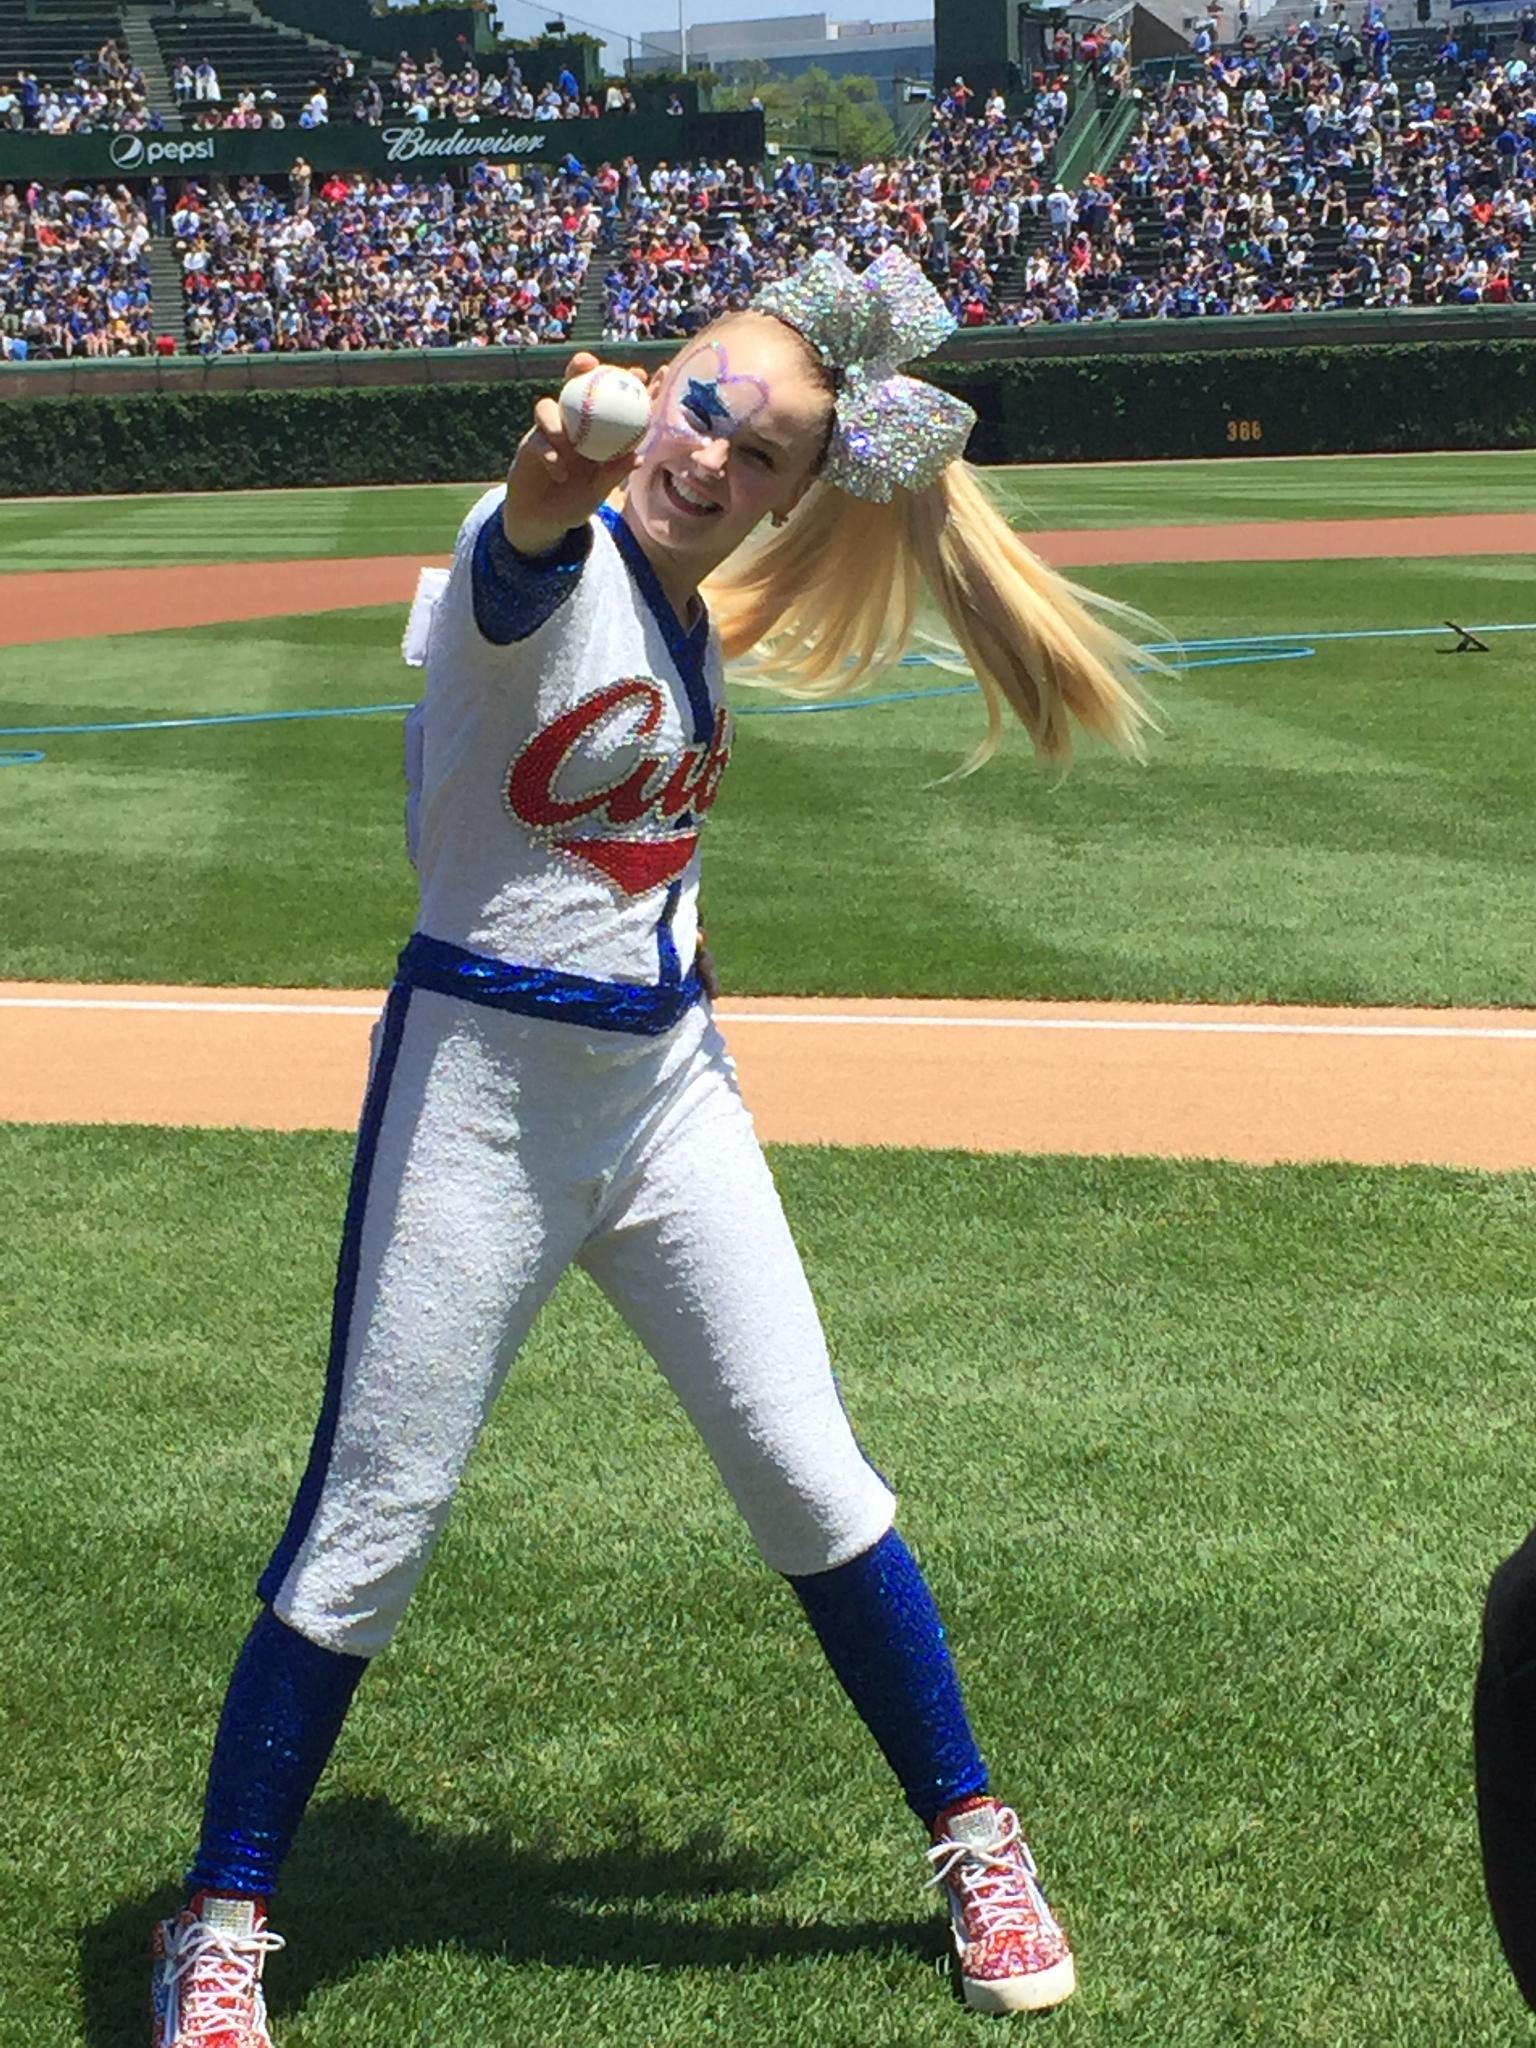 Nickelodeon on X: The @Cubs just signed a new pitcher